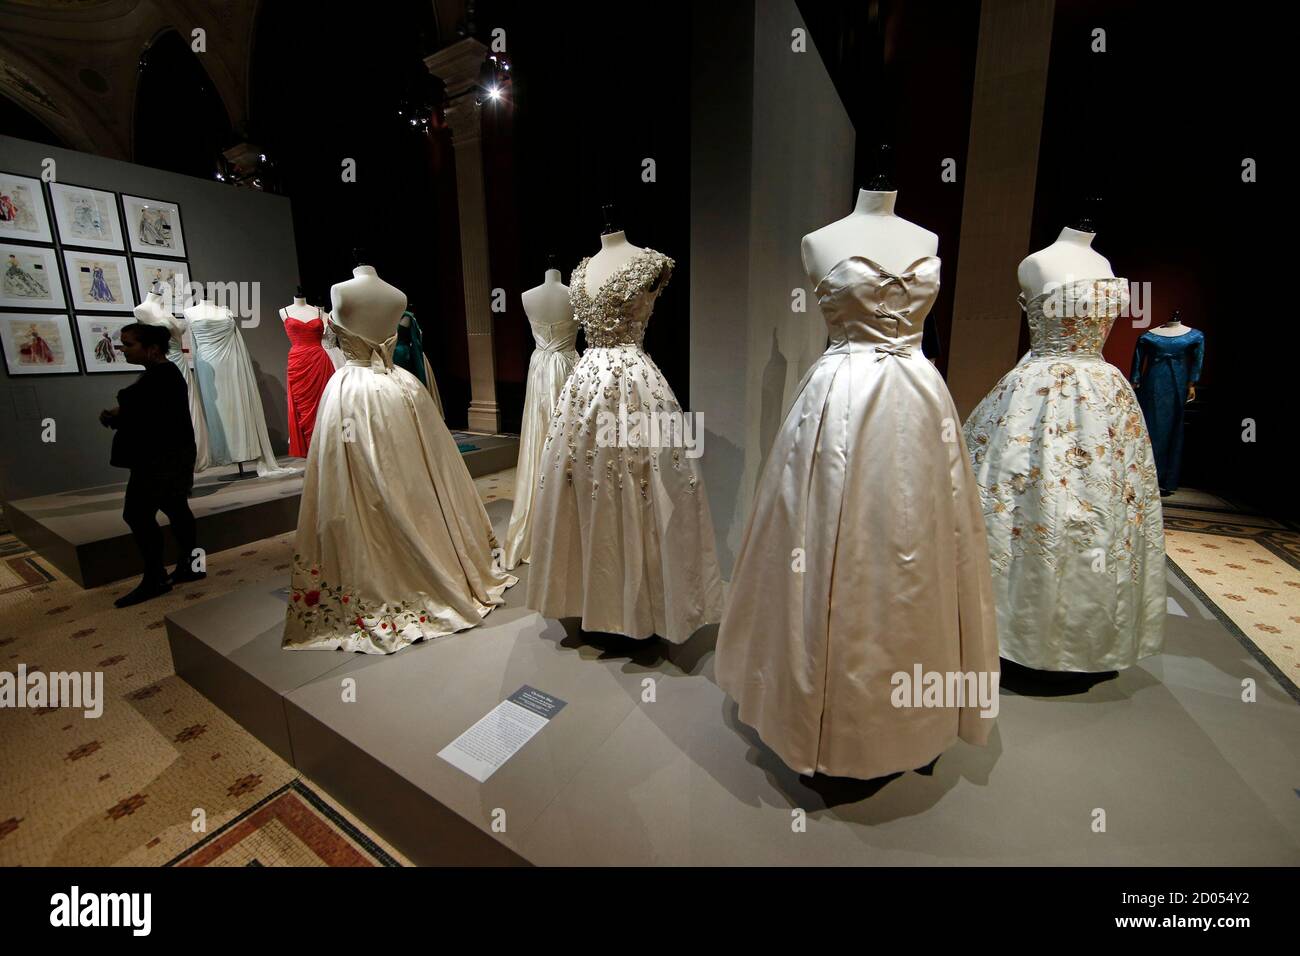 Vintage dresses by designers Christian Dior are presented in the exhibition  "Les Annees 50, La mode en France" (The 50s. Fashion in France, 1947-1957)  at the Palais Galliera fashion museum in Paris,